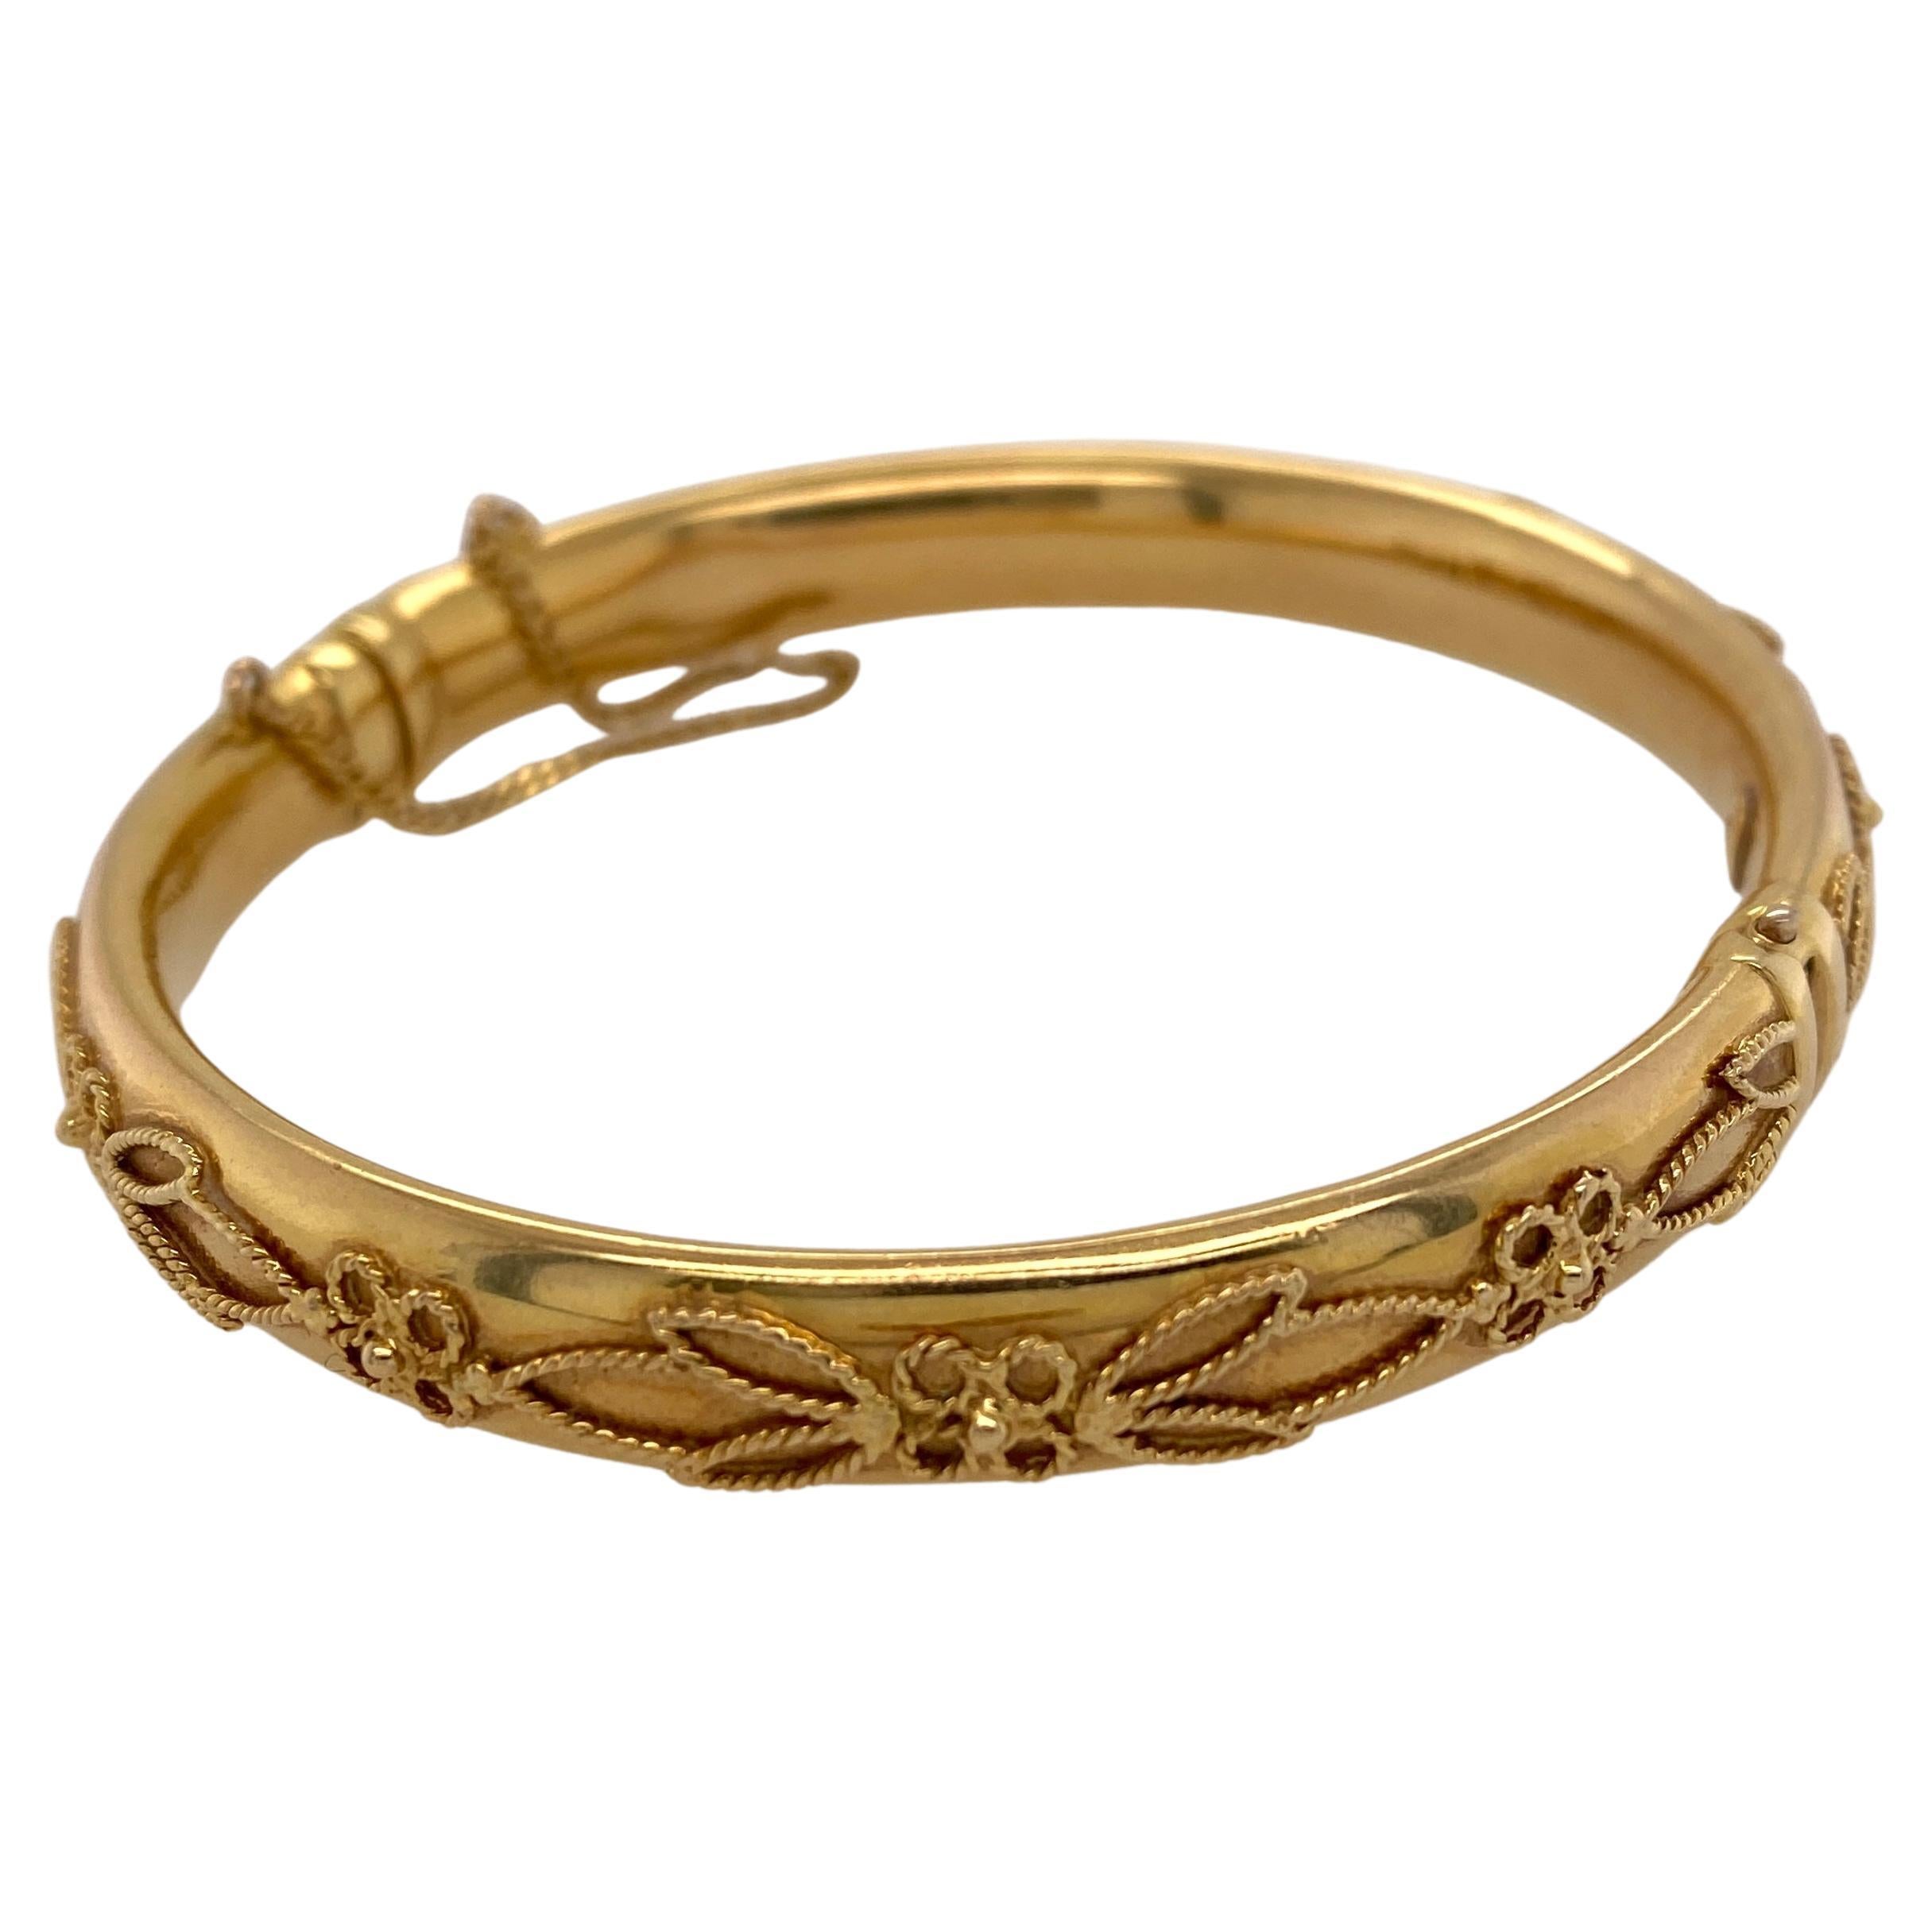 Vintage Italian Bracelet with Floral Design in Twisted Wire, 14k Yellow Gold